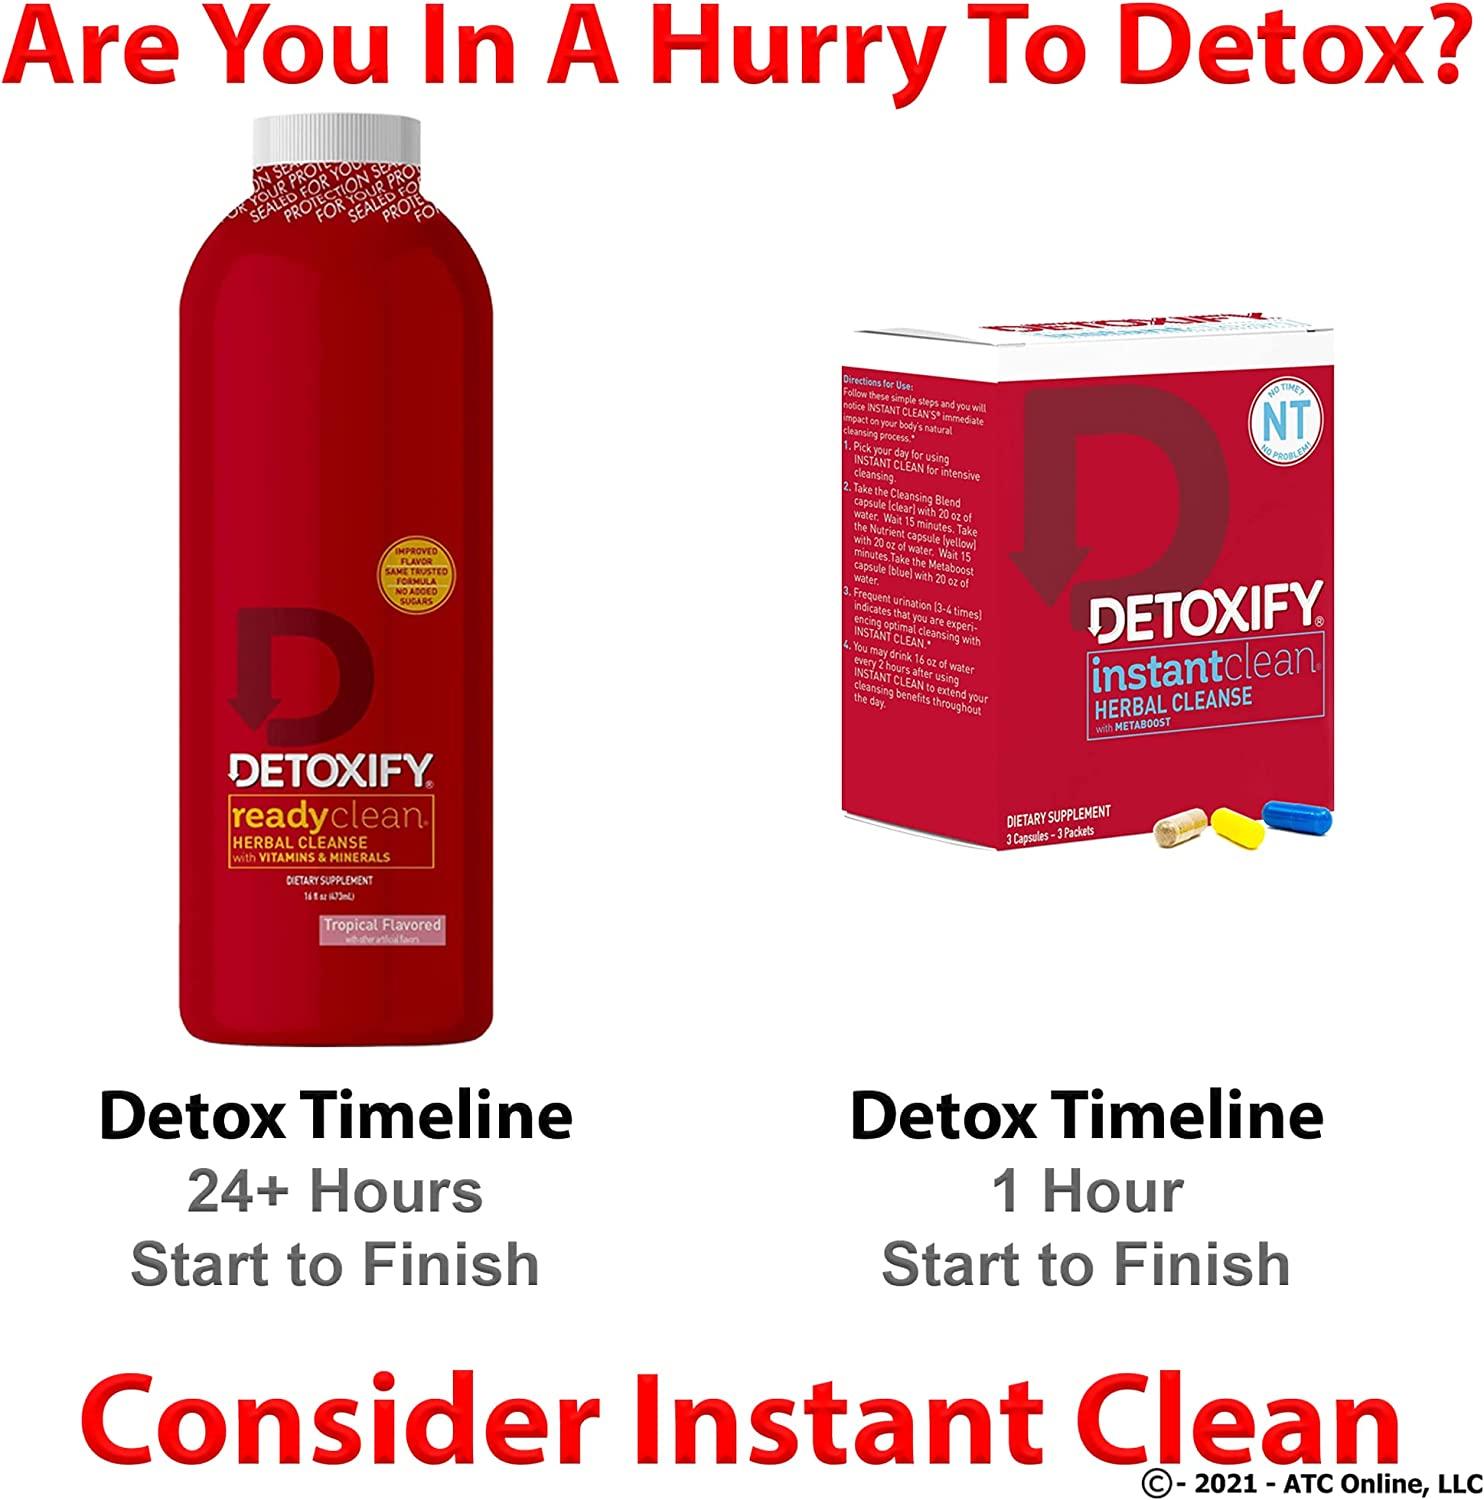 Ready Clean Detox Drink 16 oz. - Herbal Precleanse Capsules - RU Clean 6 -  Pre Cleanse, Detoxify and Quick Flush Your Body - Fast Professionally  Formulated 1 Hour RU Clean Detoxify Kit